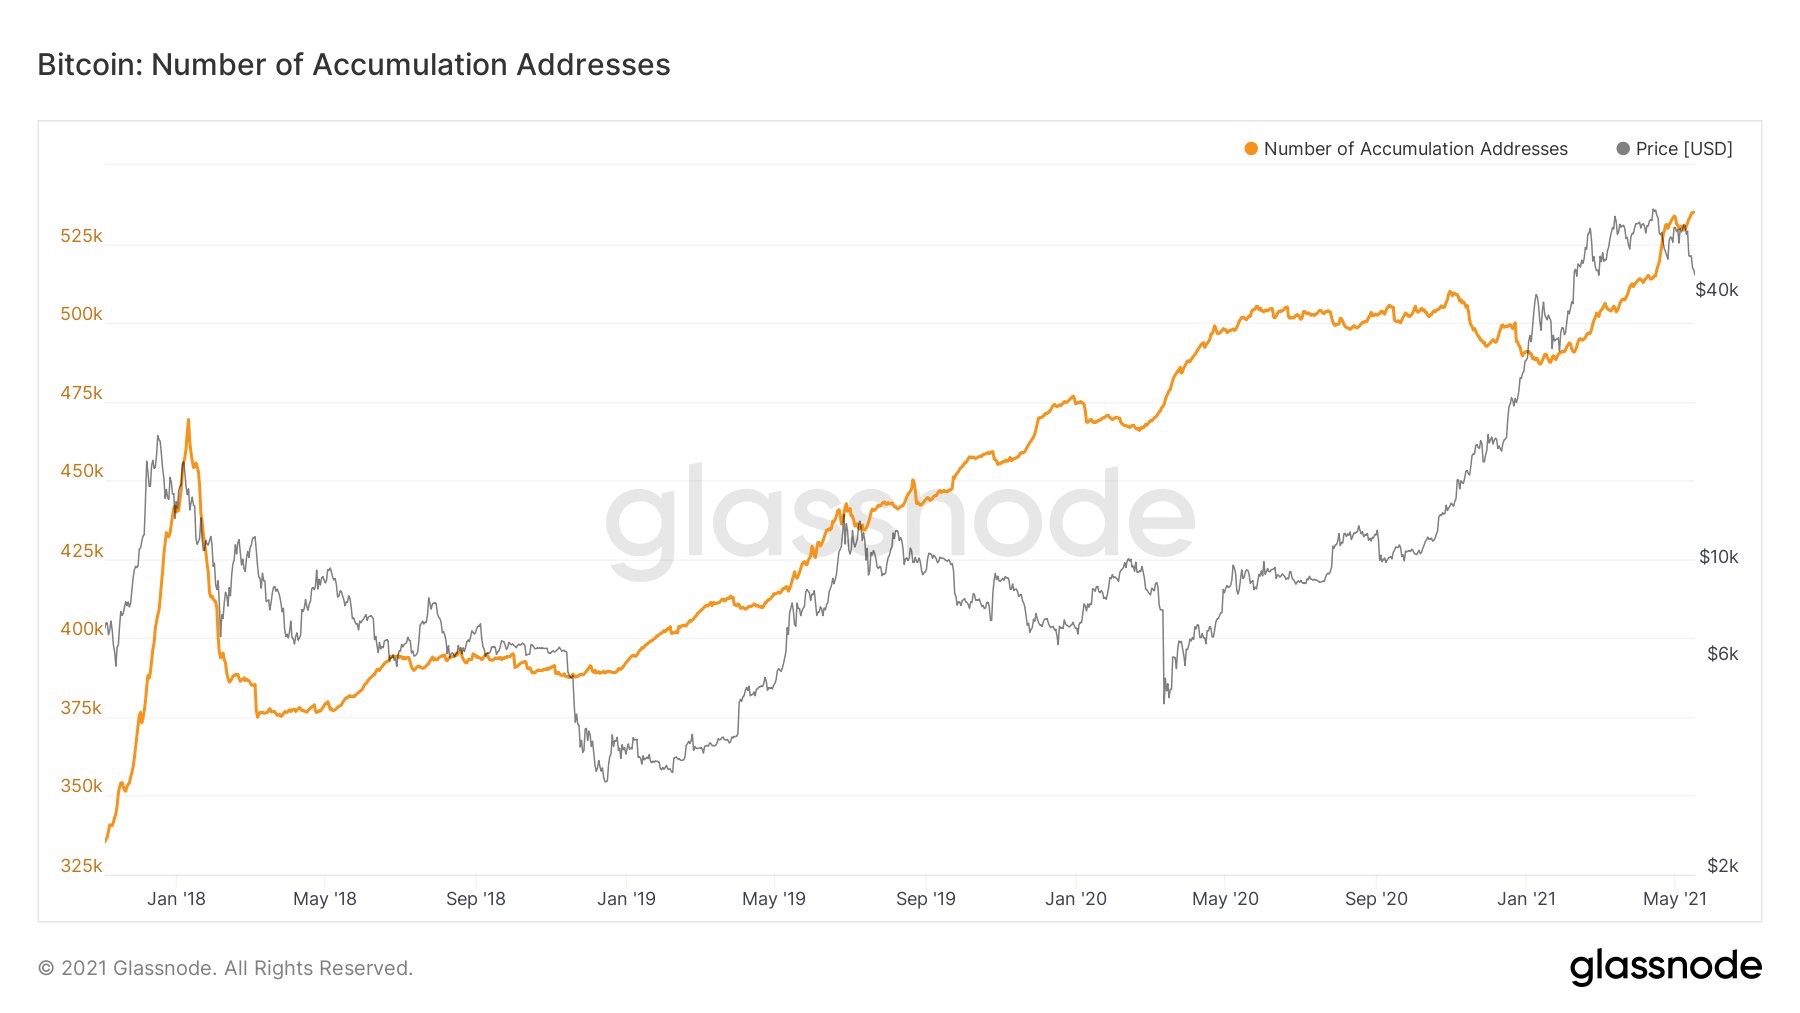 Data Shows Bitcoin Addresses in Accumulation Captures Fresh New Highs